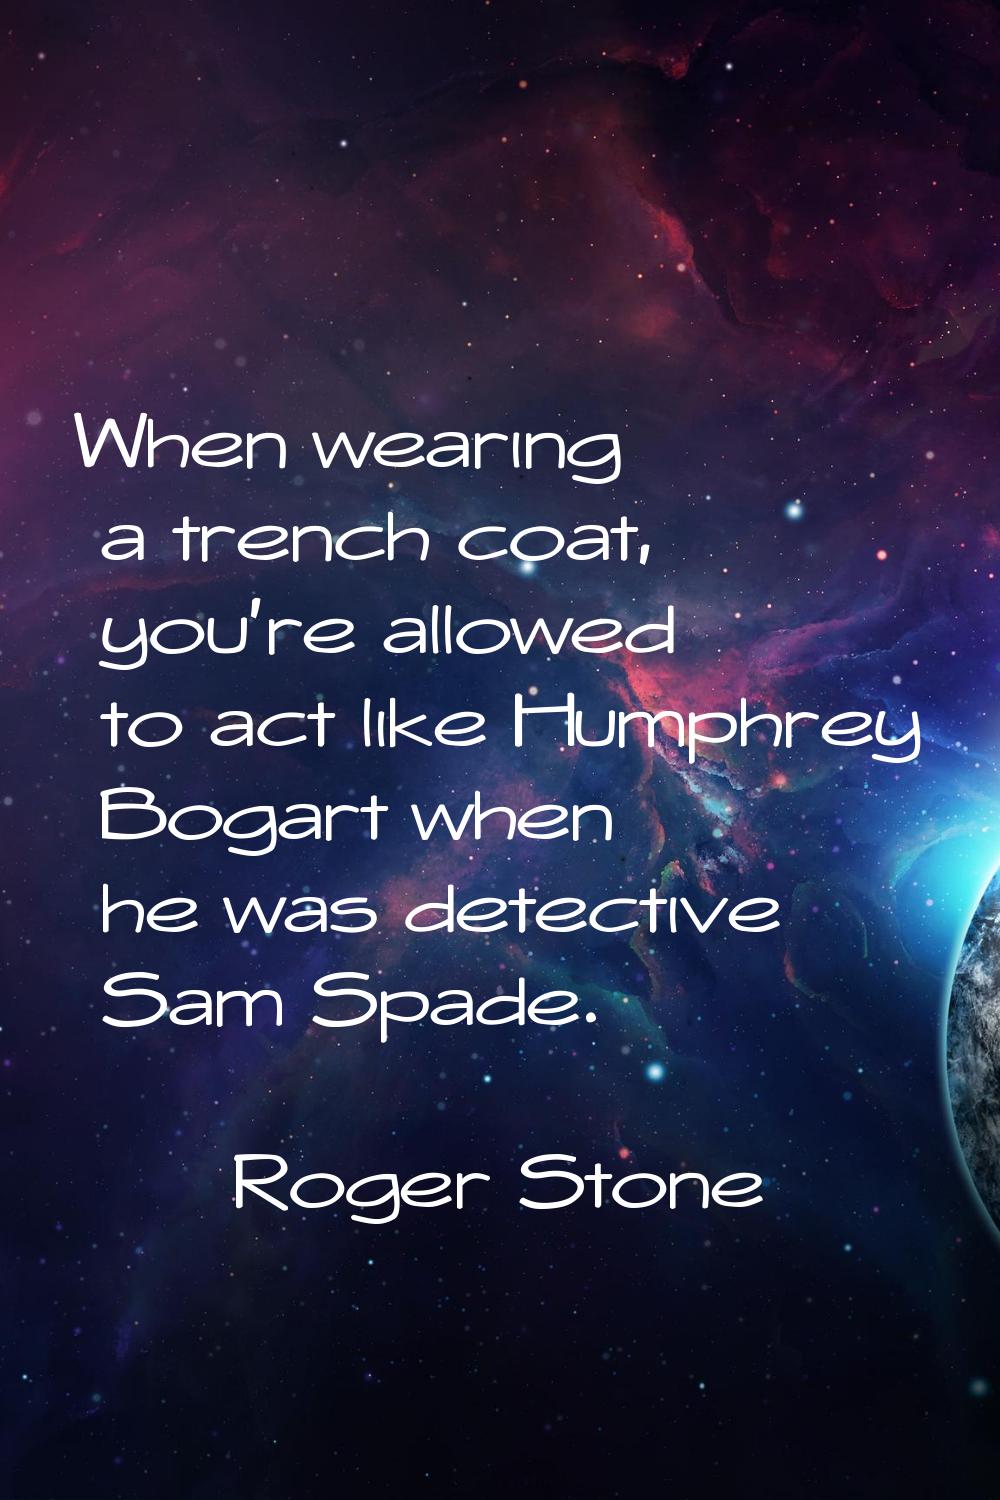 When wearing a trench coat, you're allowed to act like Humphrey Bogart when he was detective Sam Sp